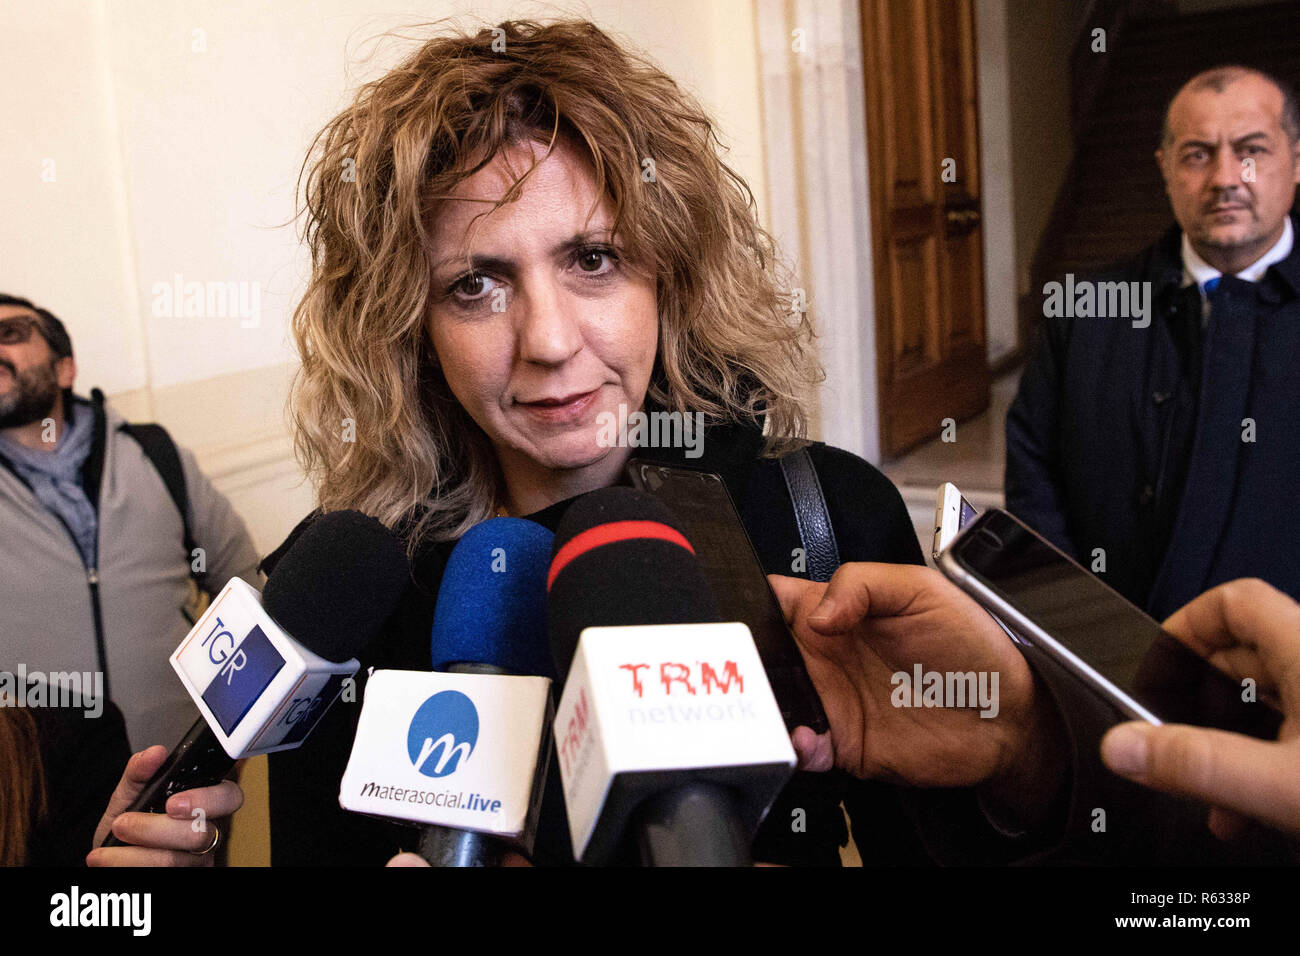 Matera, MT, Italy. 3rd Dec, 2019. The Minister of the South Barbara lezzi seen speaking at a press conference after the coordination meeting with the Municipality of Matera, the Matera Foundation 2019, FAL, Anas, Invitalia to check the time schedule of the infrastructural works planned for Matera 2019. Credit: Cosimo Martemucci/SOPA Images/ZUMA Wire/Alamy Live News Stock Photo